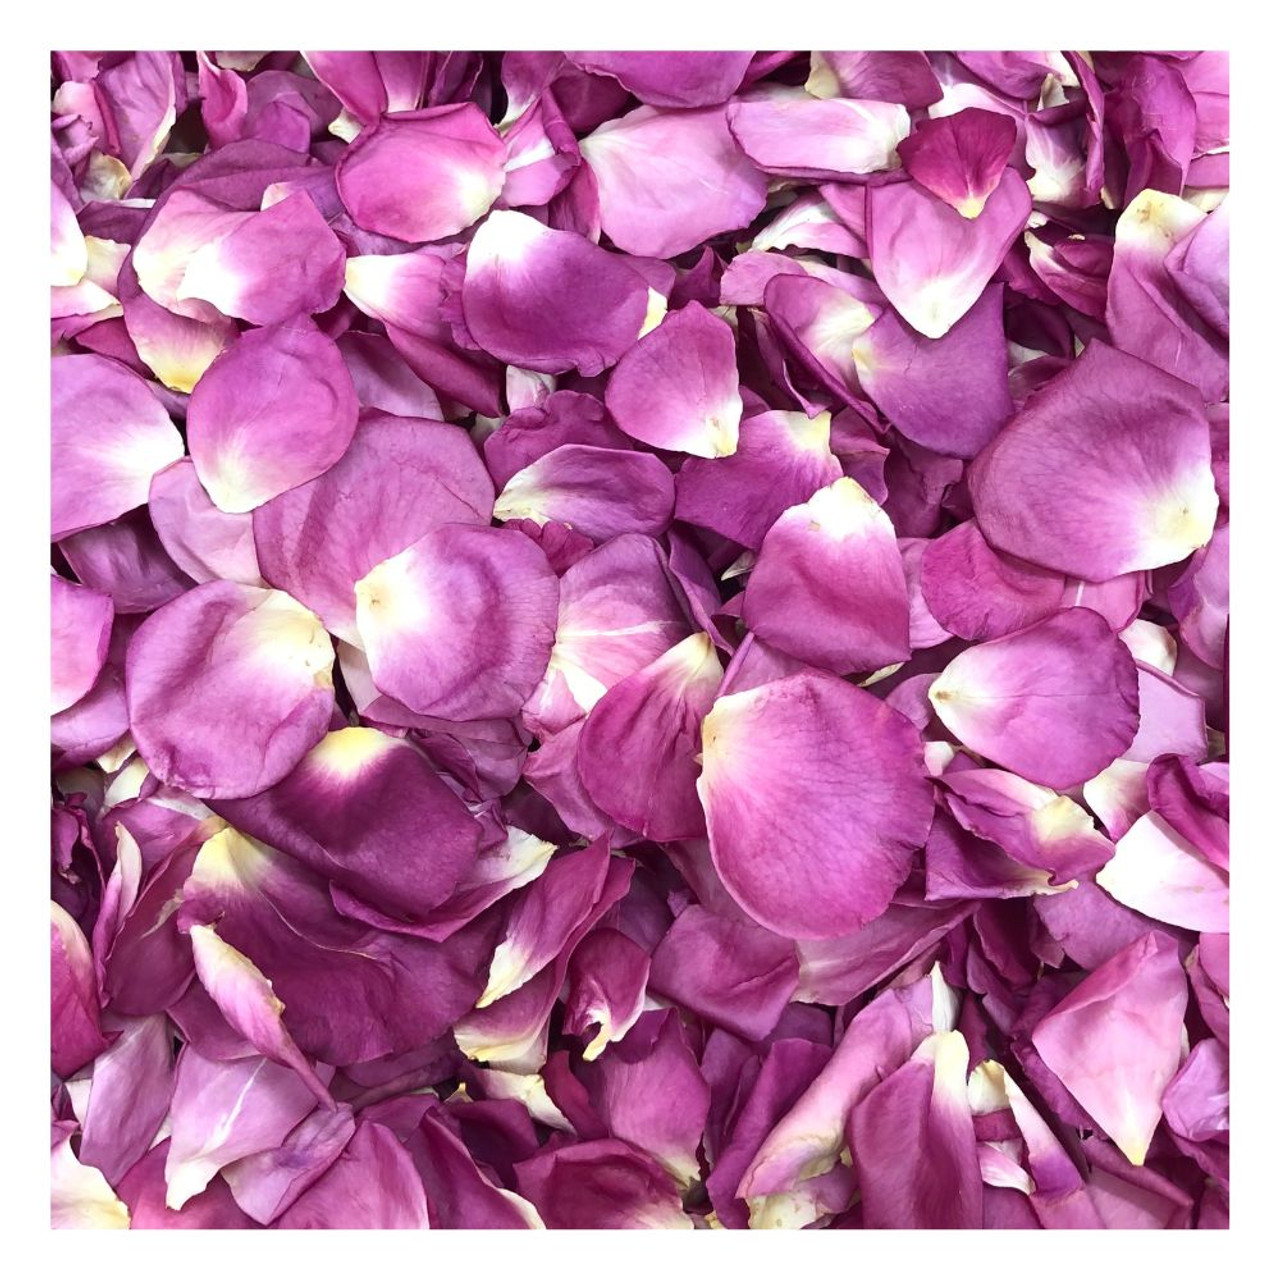 All My Loving Real Rose Petals Freeze-dried, Eco-friendly, Biodegradable,  Grown in Oregon, USA